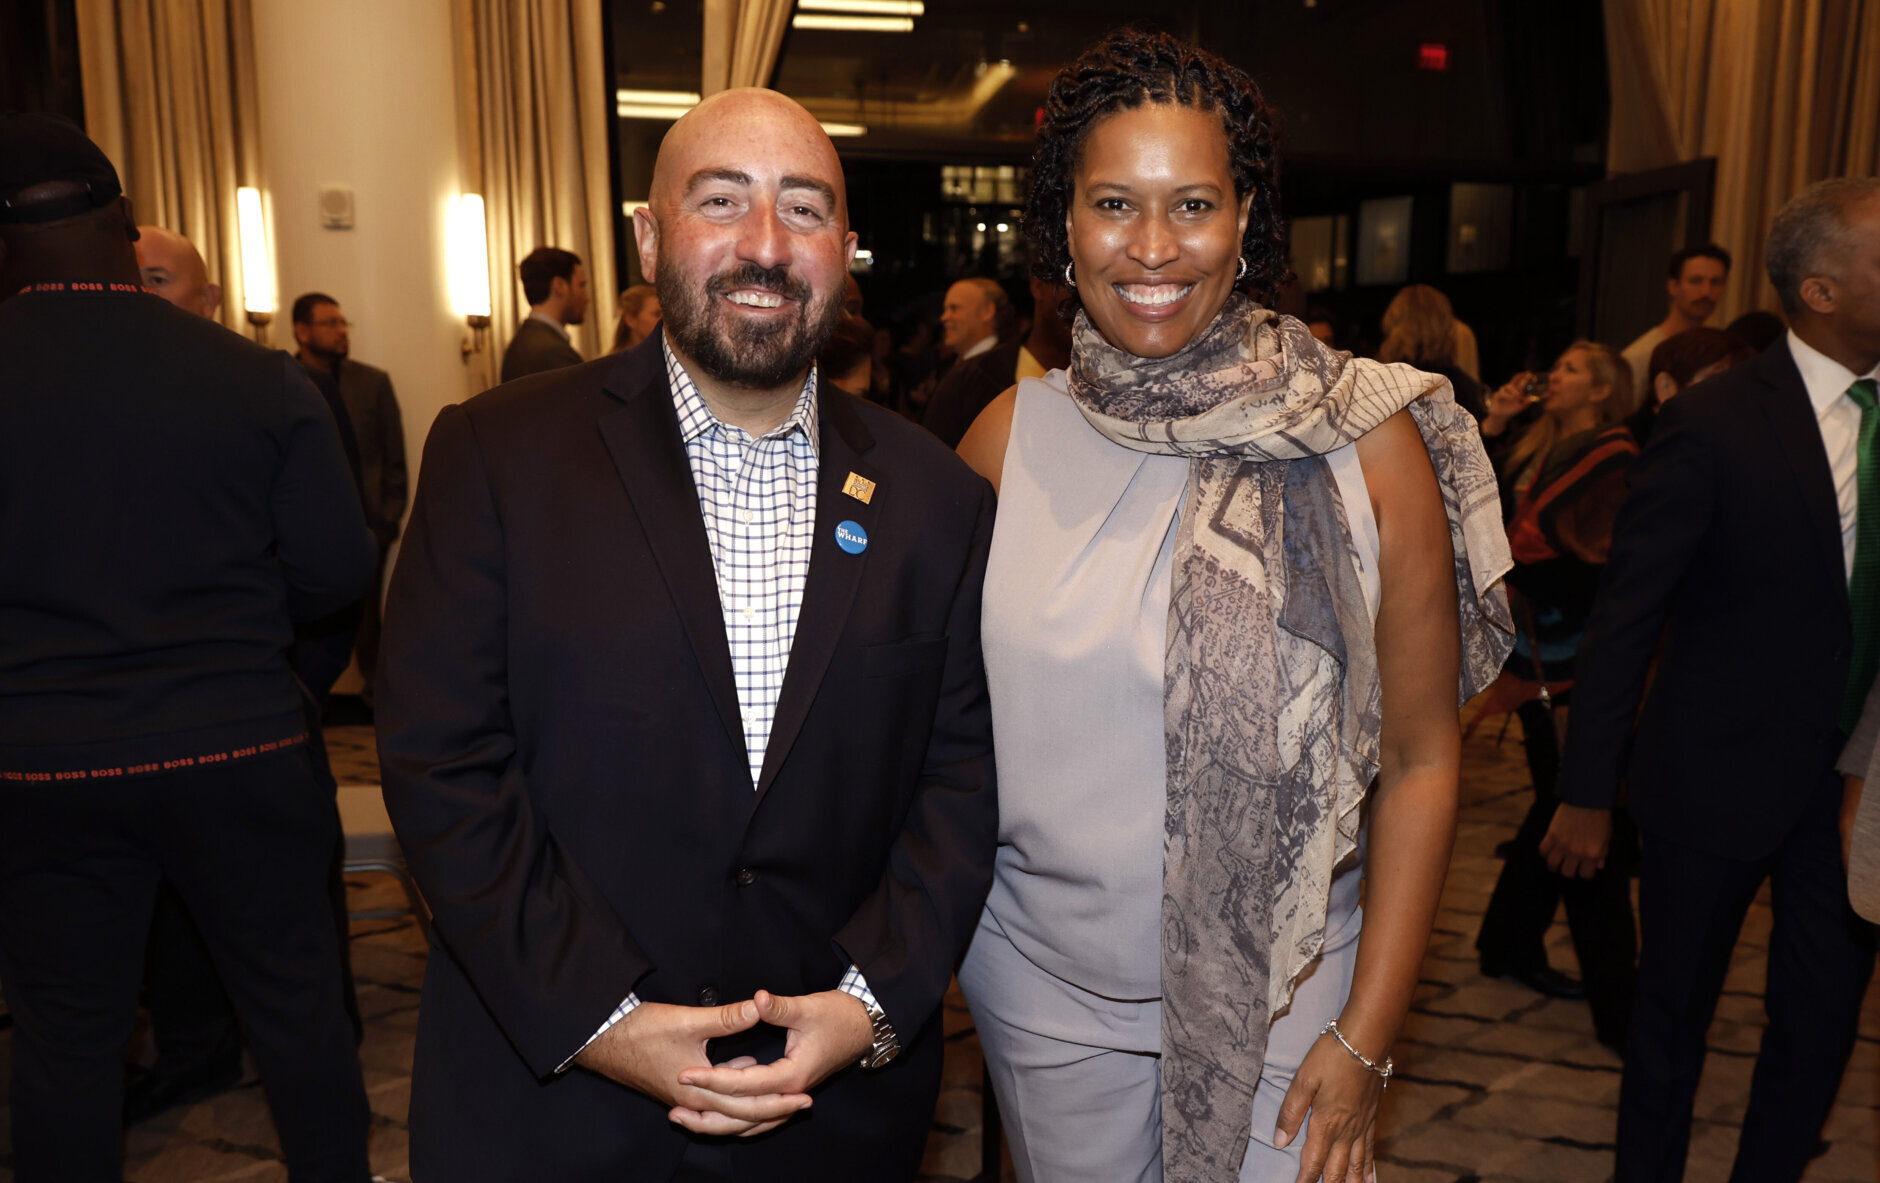 <p><strong>Political scandal</strong></p>
<p>In March, D.C. Mayor Muriel Bowser&#8217;s office was rocked by a sudden departure: Deputy Mayor for Planning and Economic Development, John Falcicchio <a href="https://wtop.com/dc/2023/03/dc-deputy-mayor-john-falcicchio-leaves-bowsers-office-without-explanation/" target="_blank" rel="noopener">abruptly left his post</a>.</p>
<p>A few days later, it was revealed Falcicchio had resigned after the District launched an investigation into &#8220;<a href="https://wtop.com/dc/2023/03/sexual-harassment-complaint-filed-against-dc-mayors-former-chief-of-staff/" target="_blank" rel="noopener">serious allegations of sexual harassment</a>&#8221; lodged by a city employee. Soon after, <a href="https://wtop.com/dc/2023/03/2nd-sexual-harassment-complaint-filed-against-dc-mayors-former-chief-of-staff/" target="_blank" rel="noopener">a second complaint emerged</a>.</p>
<p>It was a stunning political fall from grace for one of Bowser&#8217;s closest confidants.</p>
<p>Later, the Mayor&#8217;s Office of Legal Counsel said it <a href="https://wtop.com/dc/2023/06/dc-mayor-bowsers-former-top-adviser-sexually-harassed-city-employee-probe-finds/" target="_blank" rel="noopener">substantiated claims of sexual harassment</a> by Falcicchio against both accusers, concluding that he made advances toward the employees, and sent graphic video and sexually explicit messages to one of them.</p>
<p>However, neither investigations <span class="ui-provider a b c d e f g h i j k l m n o p q r s t u v w x y z ab ac ae af ag ah ai aj ak" dir="ltr">substantiated </span>allegations that the employees were retaliated against for rebuffing the alleged sexual advances — a key part of their complaints.</p>
<p>Not <a href="https://wtop.com/dc/2023/04/dc-lawmaker-questions-objectivity-of-investigation-into-the-mayors-former-adviser/" target="_blank" rel="noopener">satisfied with the thoroughness or independence of the investigation</a>, the D.C. Council later <a href="https://wtop.com/dc/2023/07/dc-council-passes-crime-bill-gives-police-green-light-for-high-speed-chases/" target="_blank" rel="noopener">passed legislation</a> requiring the D.C. Office of the Inspector General to conduct its own investigation into the matter.</p>
